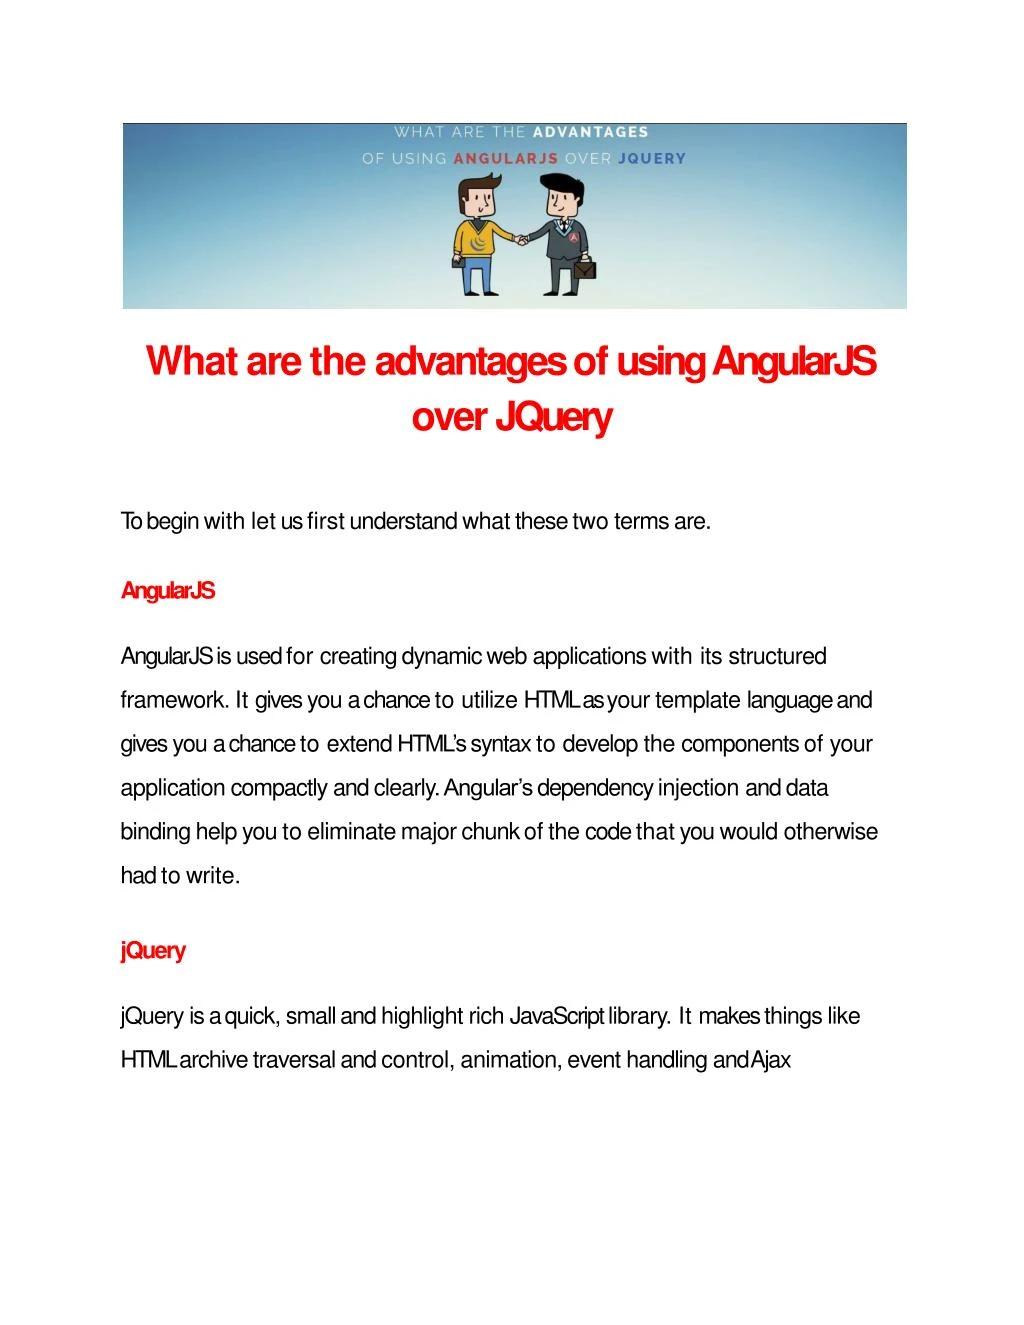 what are the advantages of using angularjs over jquery